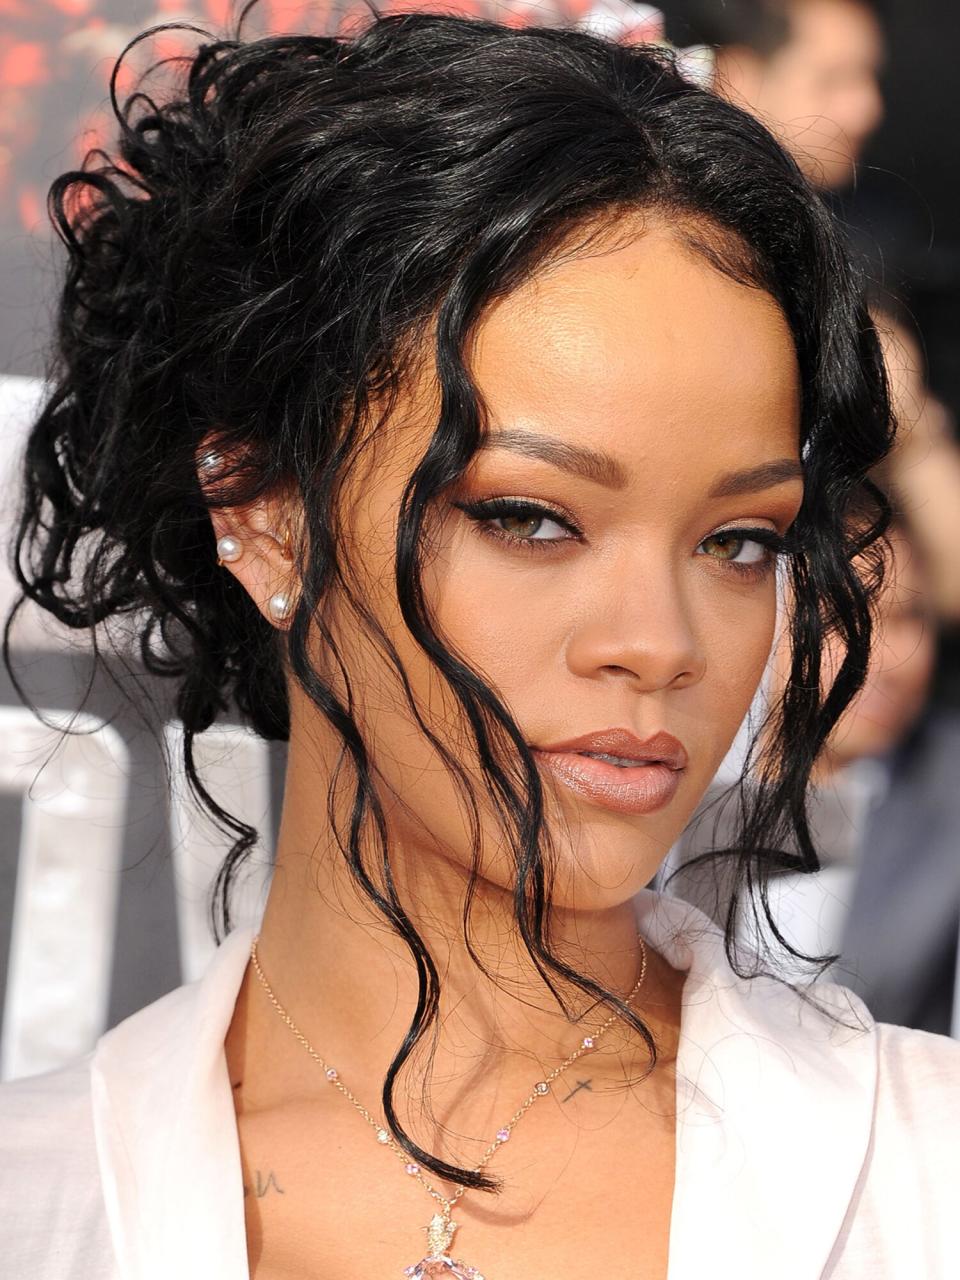 Rihanna arrives at the 2014 MTV Movie Awards at Nokia Theatre L.A. Live on April 13, 2014 in Los Angeles, California